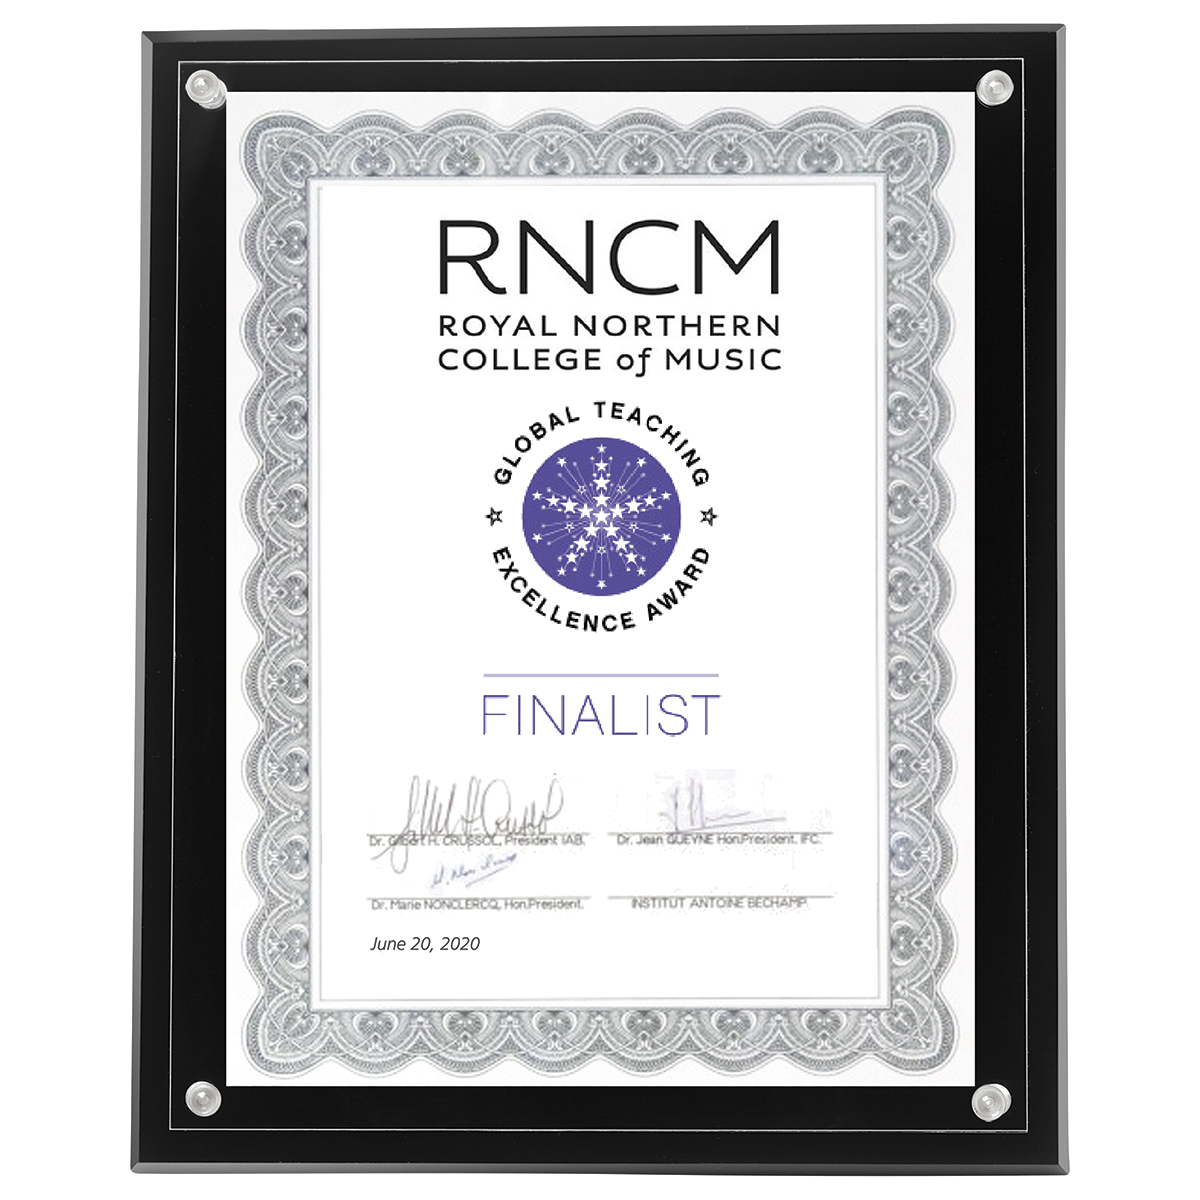 Large Certificate Holder - Clear on Black - 8" x 10" Insert